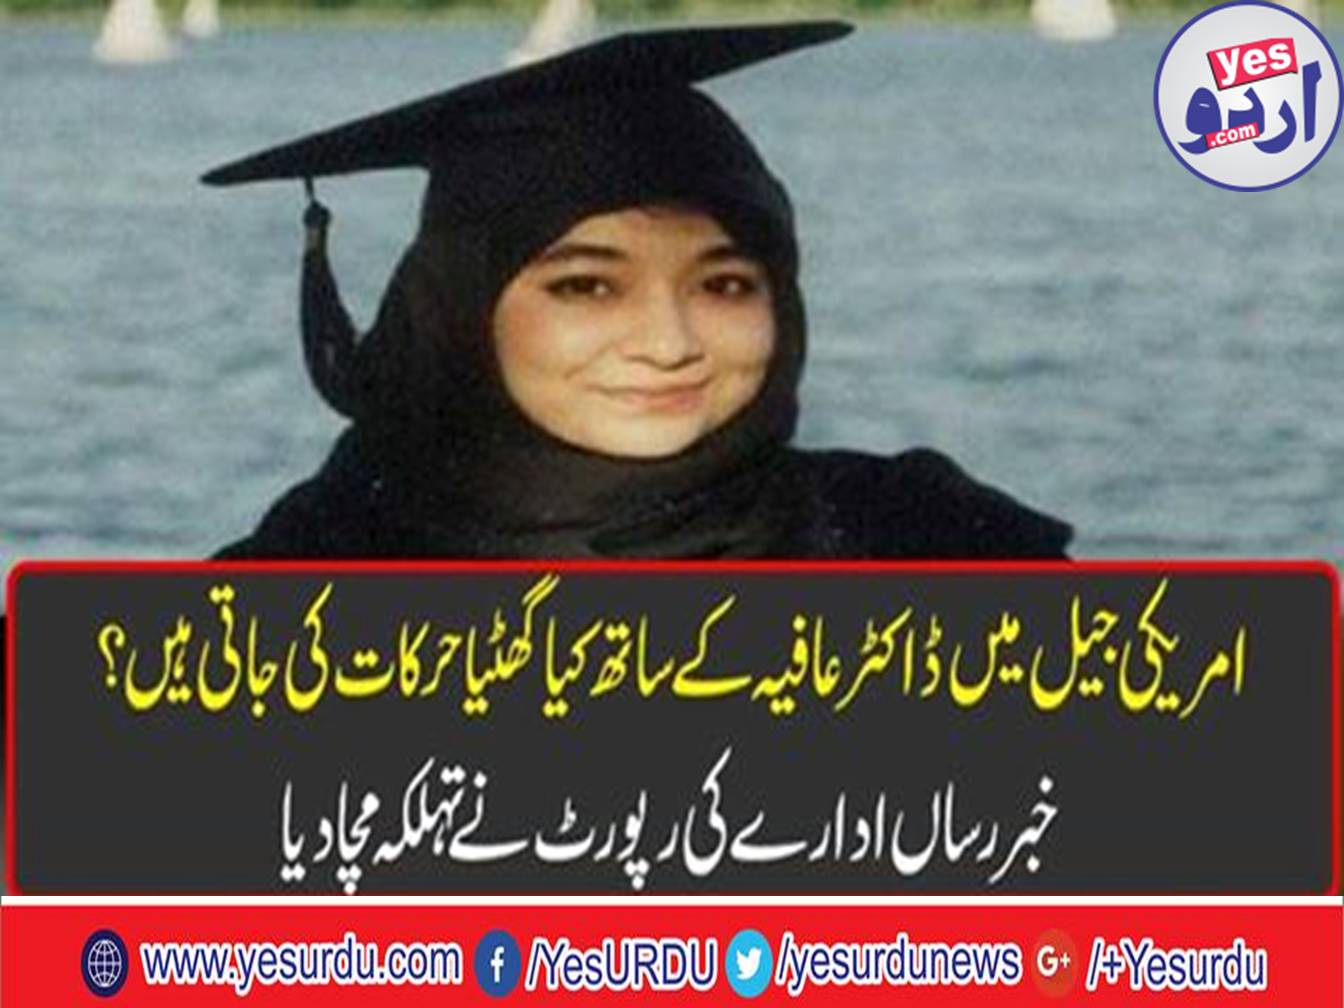 American prison officials are poisoning food and being sexually harassed to Dr. Aafia Siddiqui